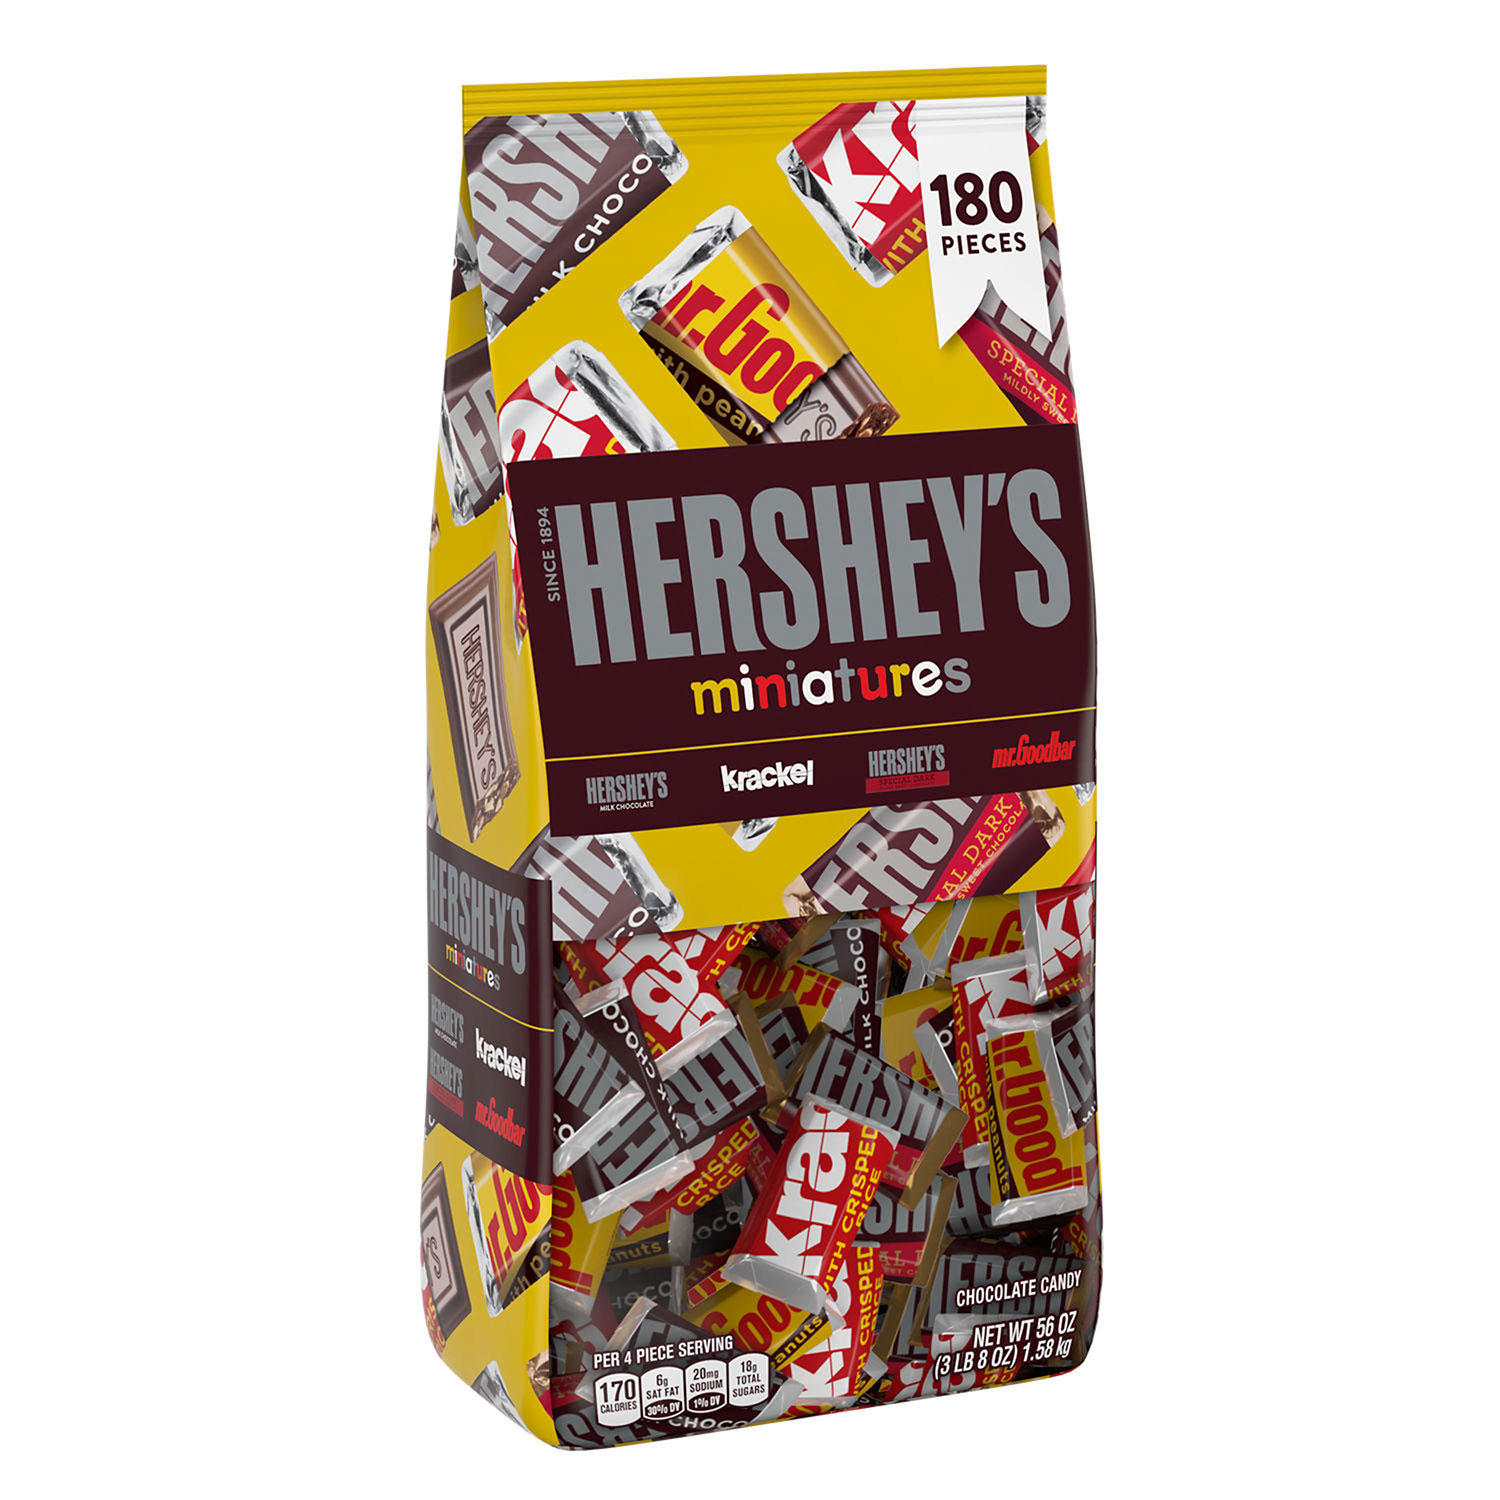 HERSHEY'S Miniatures Assorted Chocolate Candy, 180 pcs.